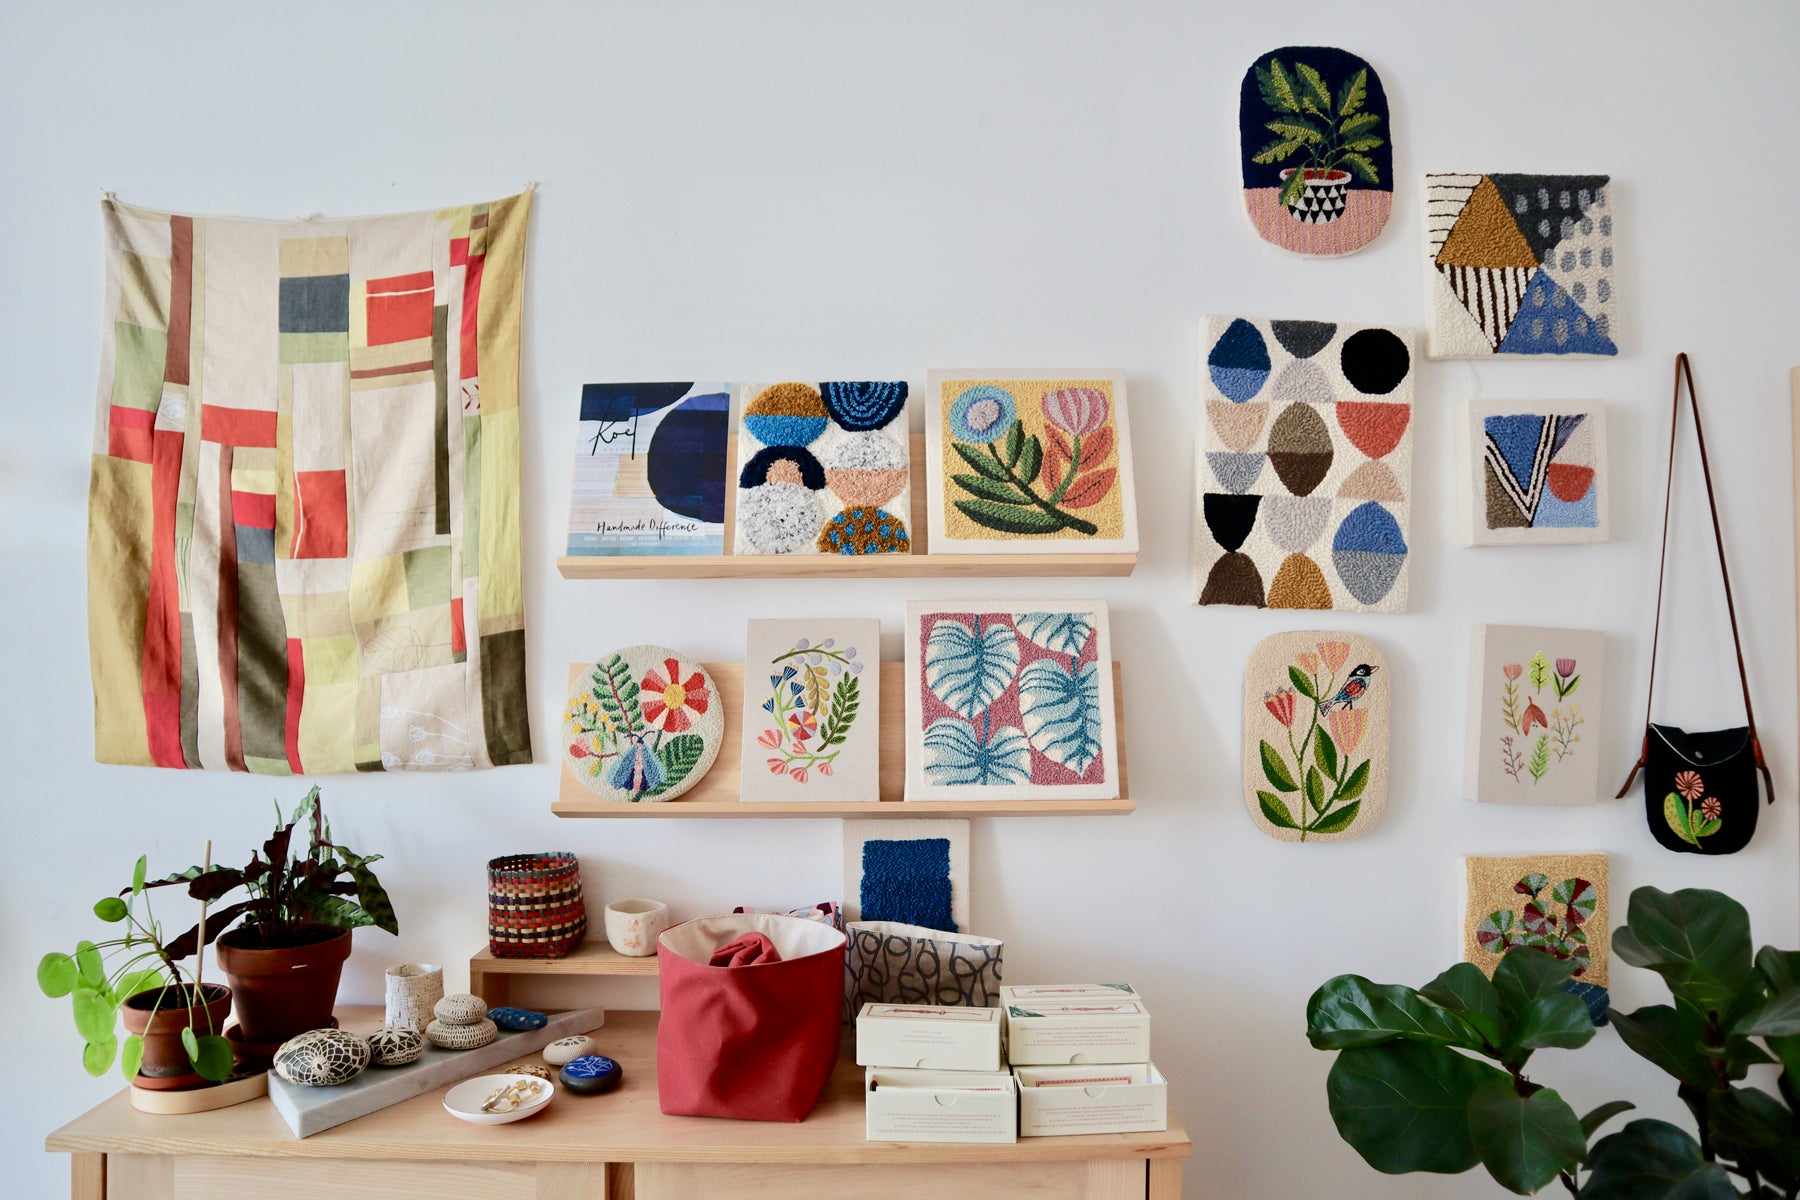 On the wall of Arounna’s shop hangs a patchwork quilt (left), a collection of 13 punch needle on canvas pieces (center), and a shoulder bag with a punch needle design (right). In front of the wall is a table with plants, rockets covered by crochet, project bags, and punch needles in boxes. 